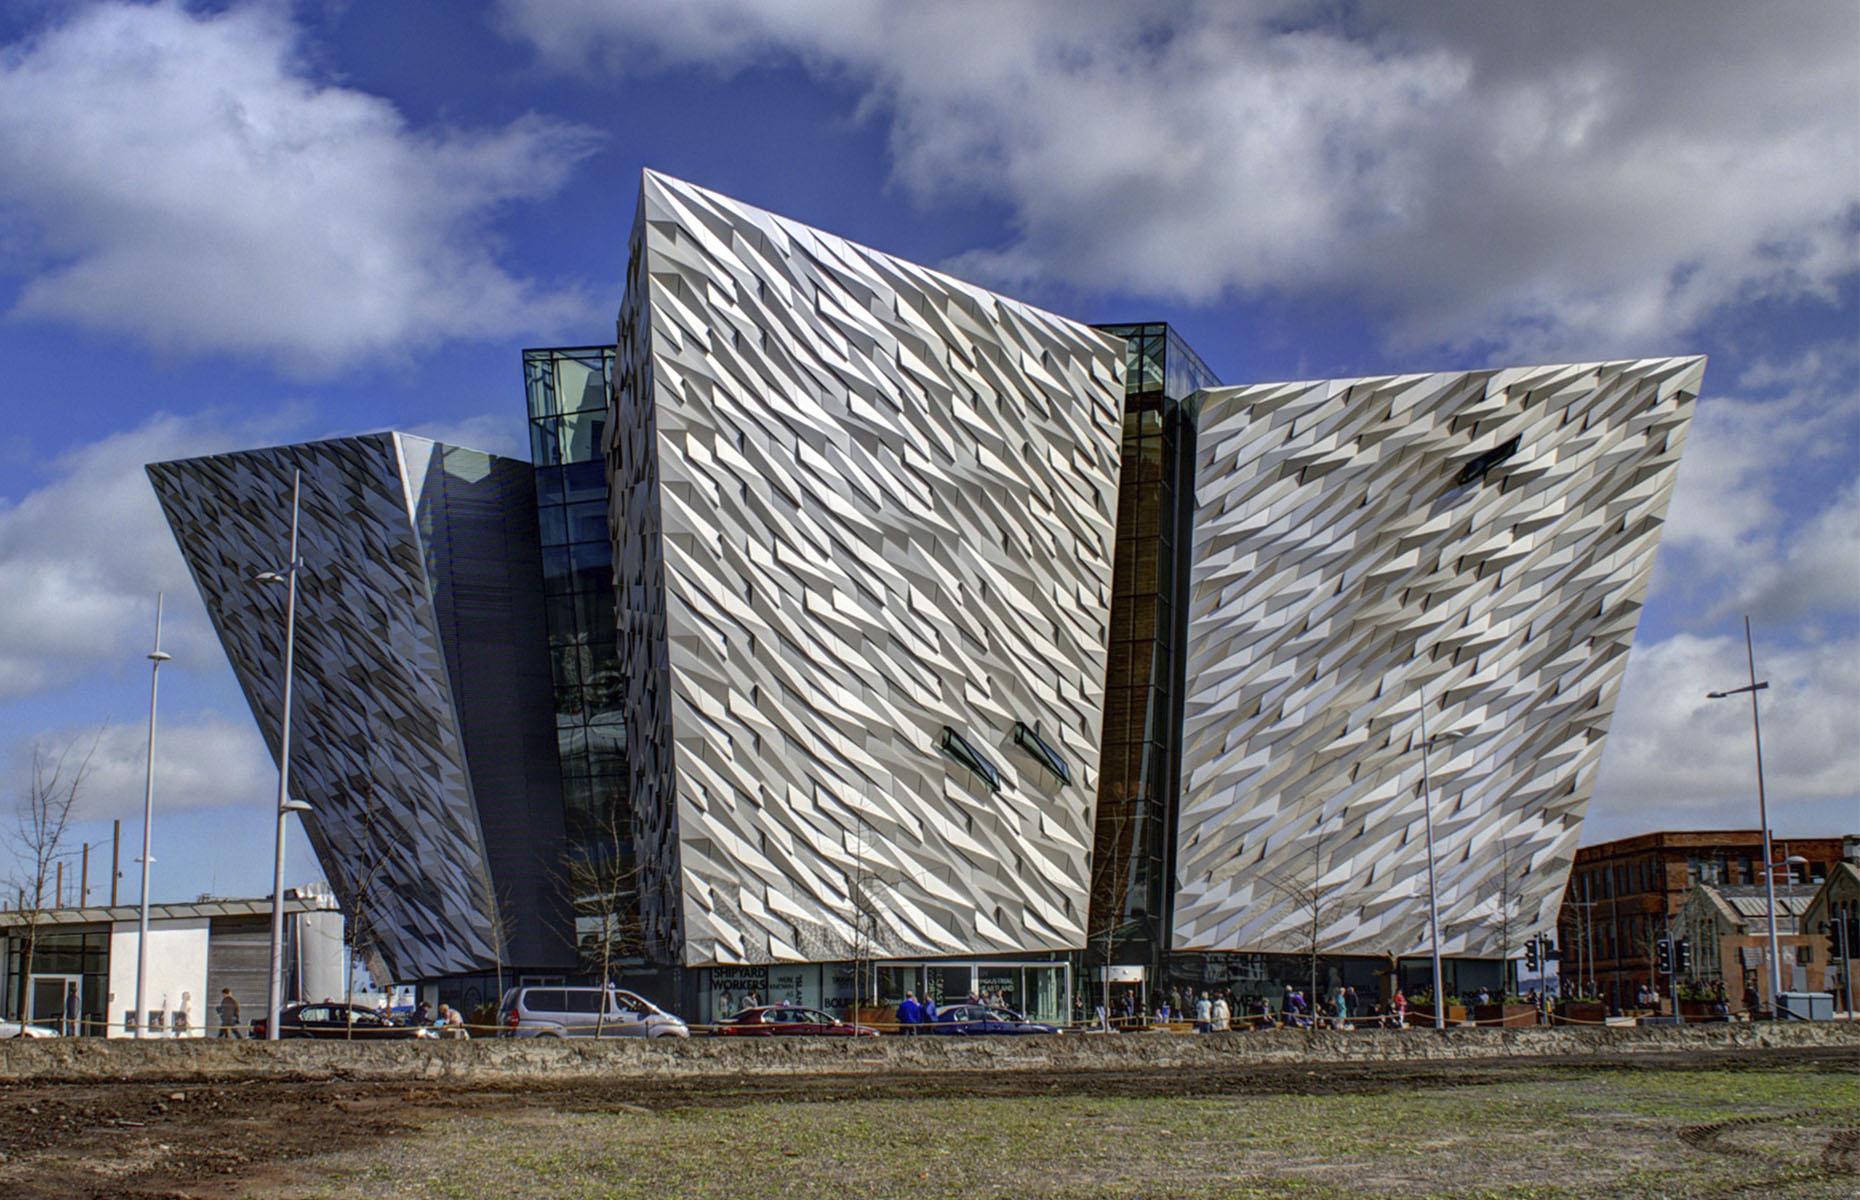 <p>There are numerous exhibitions and memorials dedicated to the Titanic. <a href="http://titanicbelfast.com/">Titanic Belfast</a> offers the definitive Titanic Experience, while <a href="https://seacitymuseum.co.uk/titanic-story">Seacity Museum</a>, Southampton tells a tale of a town where more than 500 households lost a family member. <a href="http://www.liverpoolmuseums.org.uk/maritime/visit/floor-plan/titanic/">Mersey Maritime Museum</a>, Liverpool explains the city's place in the Titanic's story, although it's currently closed due to COVID-19.</p>  <p><strong><a href="https://www.loveexploring.com/galleries/72633/secrets-of-the-titanic-life-onboard-the-worlds-most-famous-ship?page=1">Discover more secrets of life onboard the Titanic</a></strong></p>